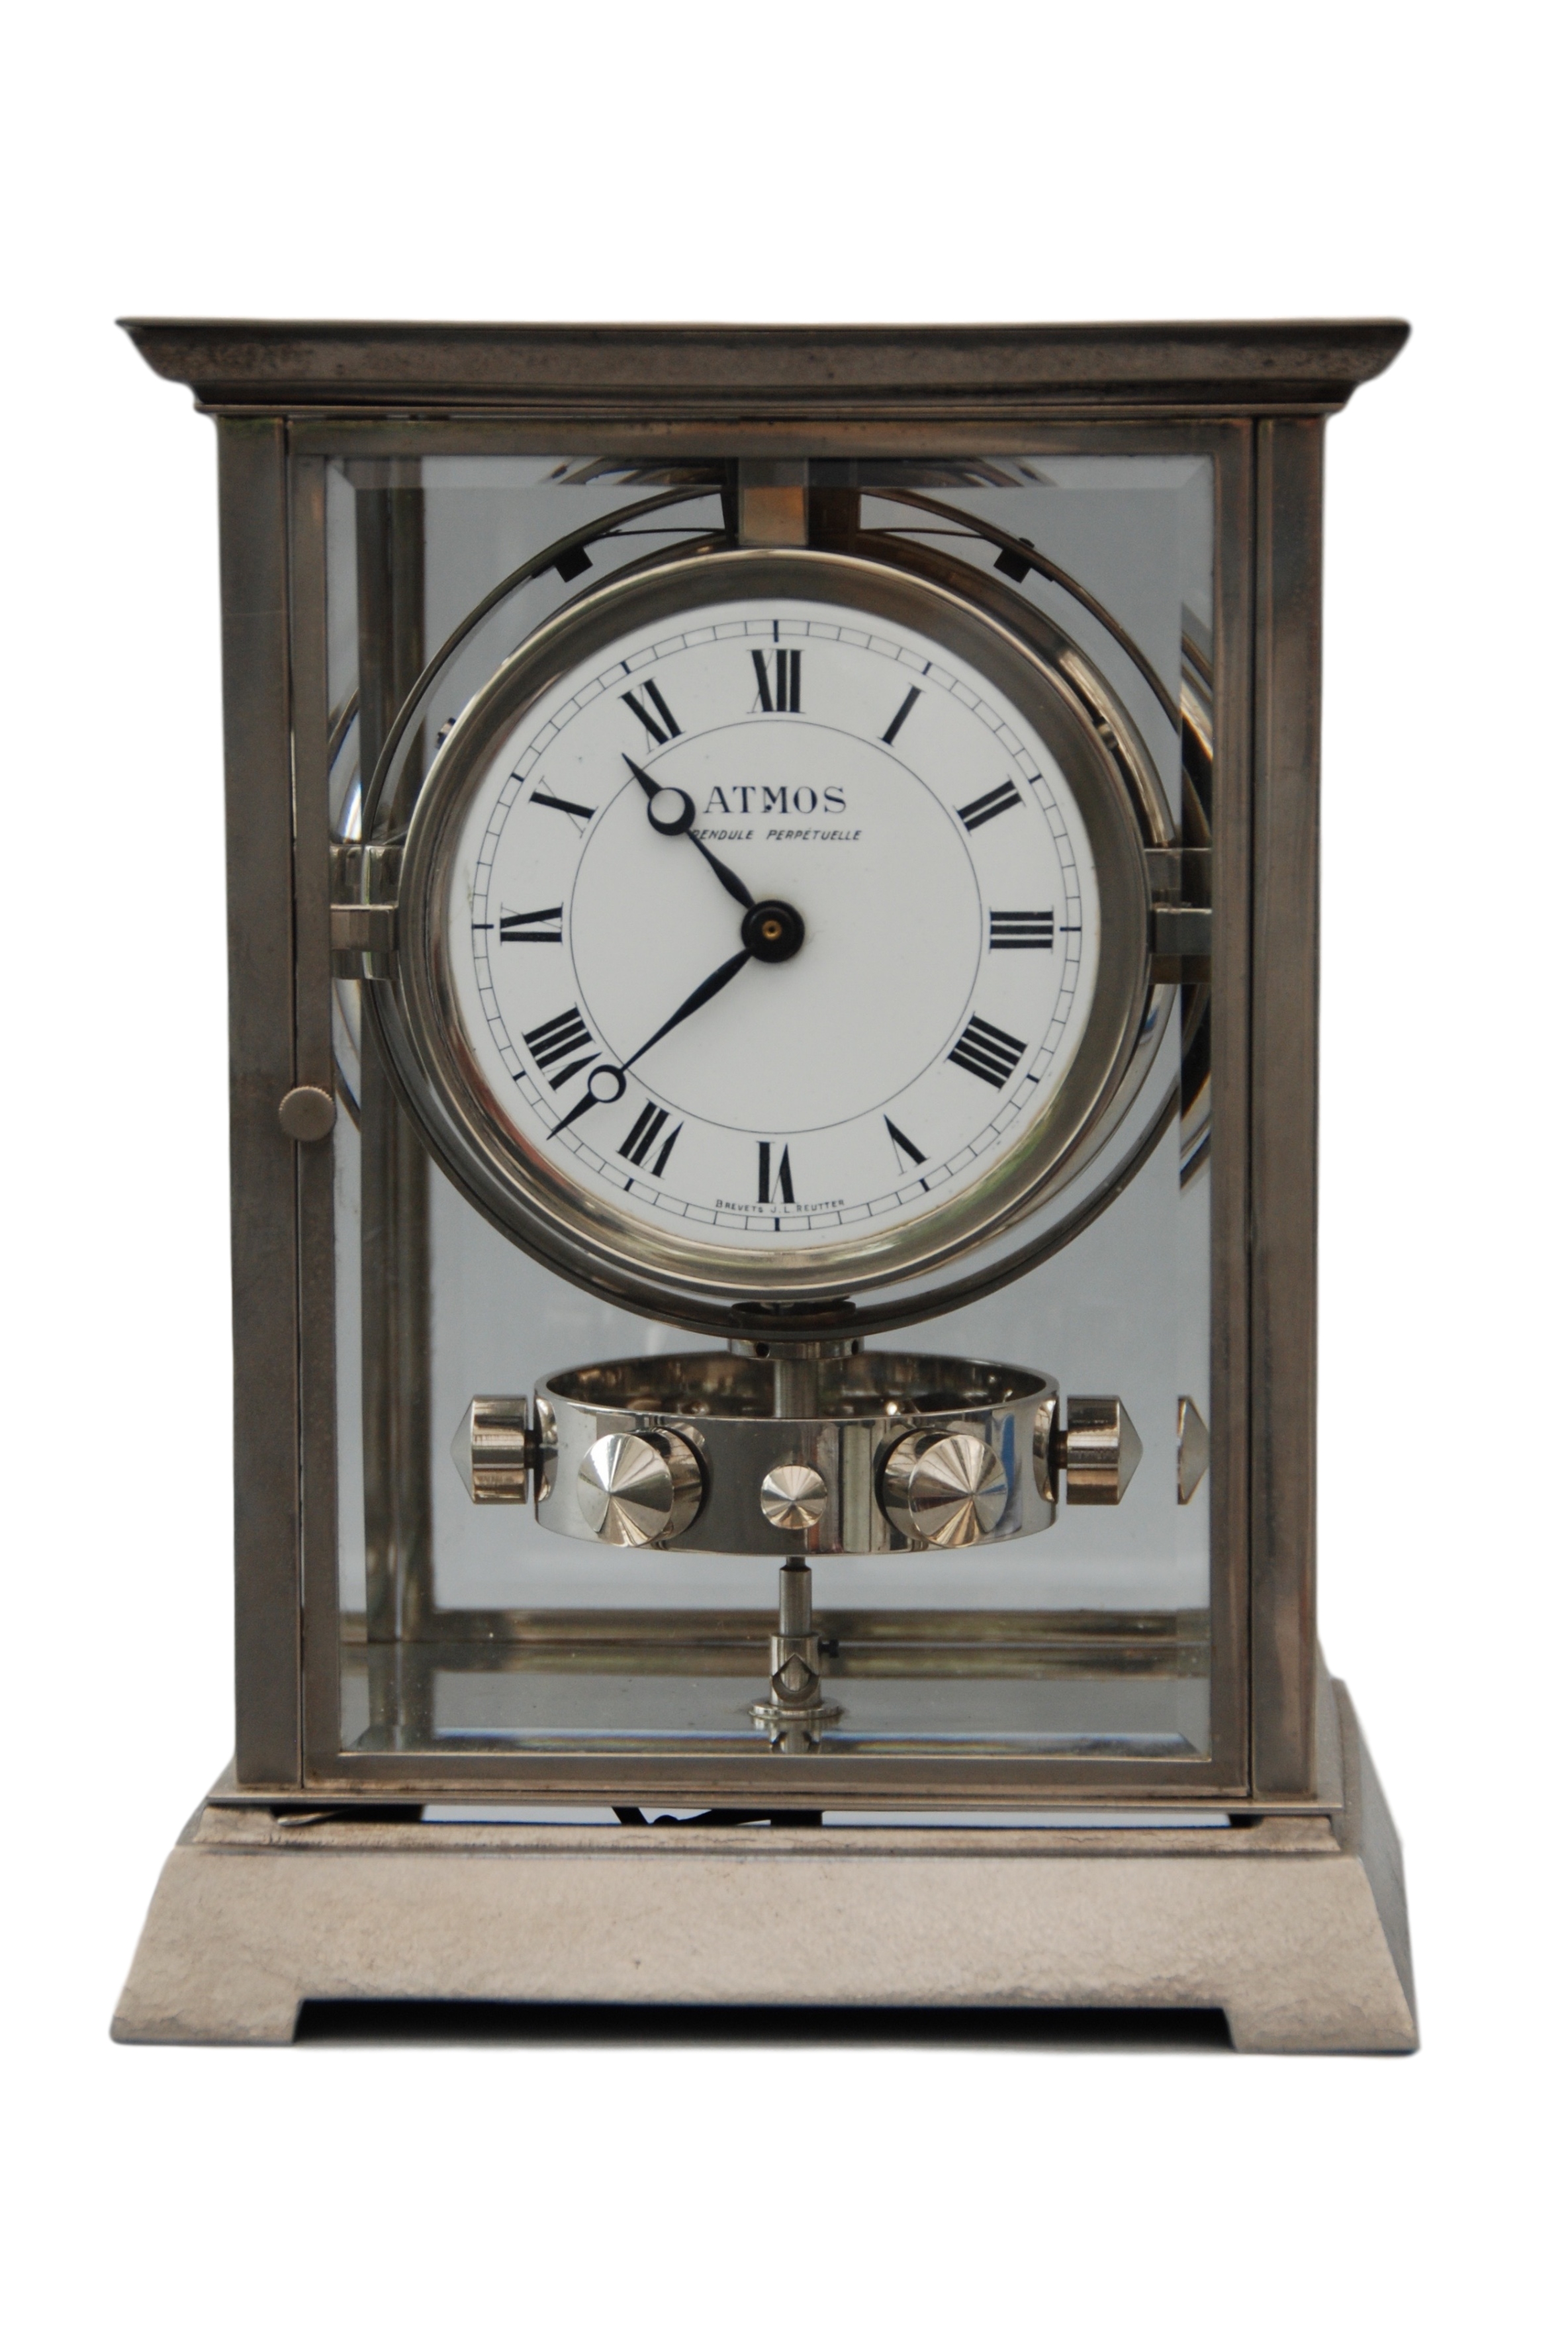 An early 1930 nickel plated art deco style J.L. Reutter four-glass atmos clock, small version.